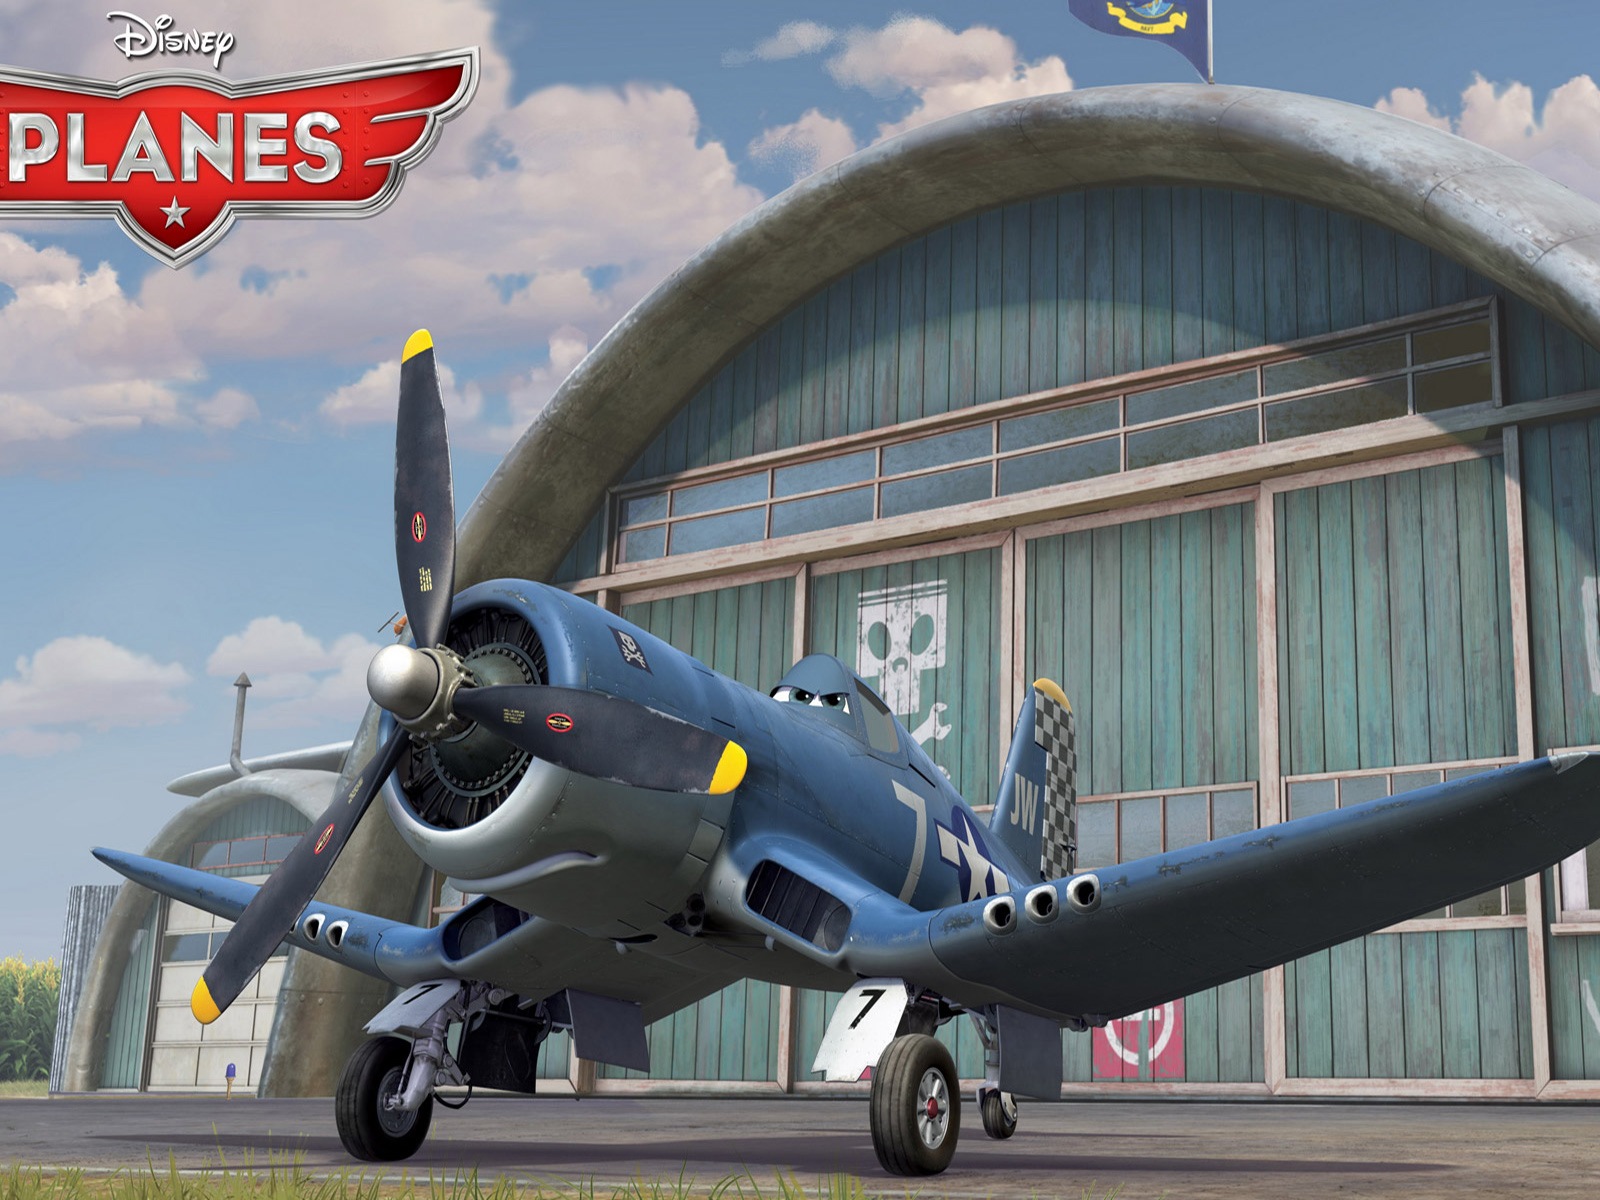 Planes 2013 HD wallpapers #13 - 1600x1200